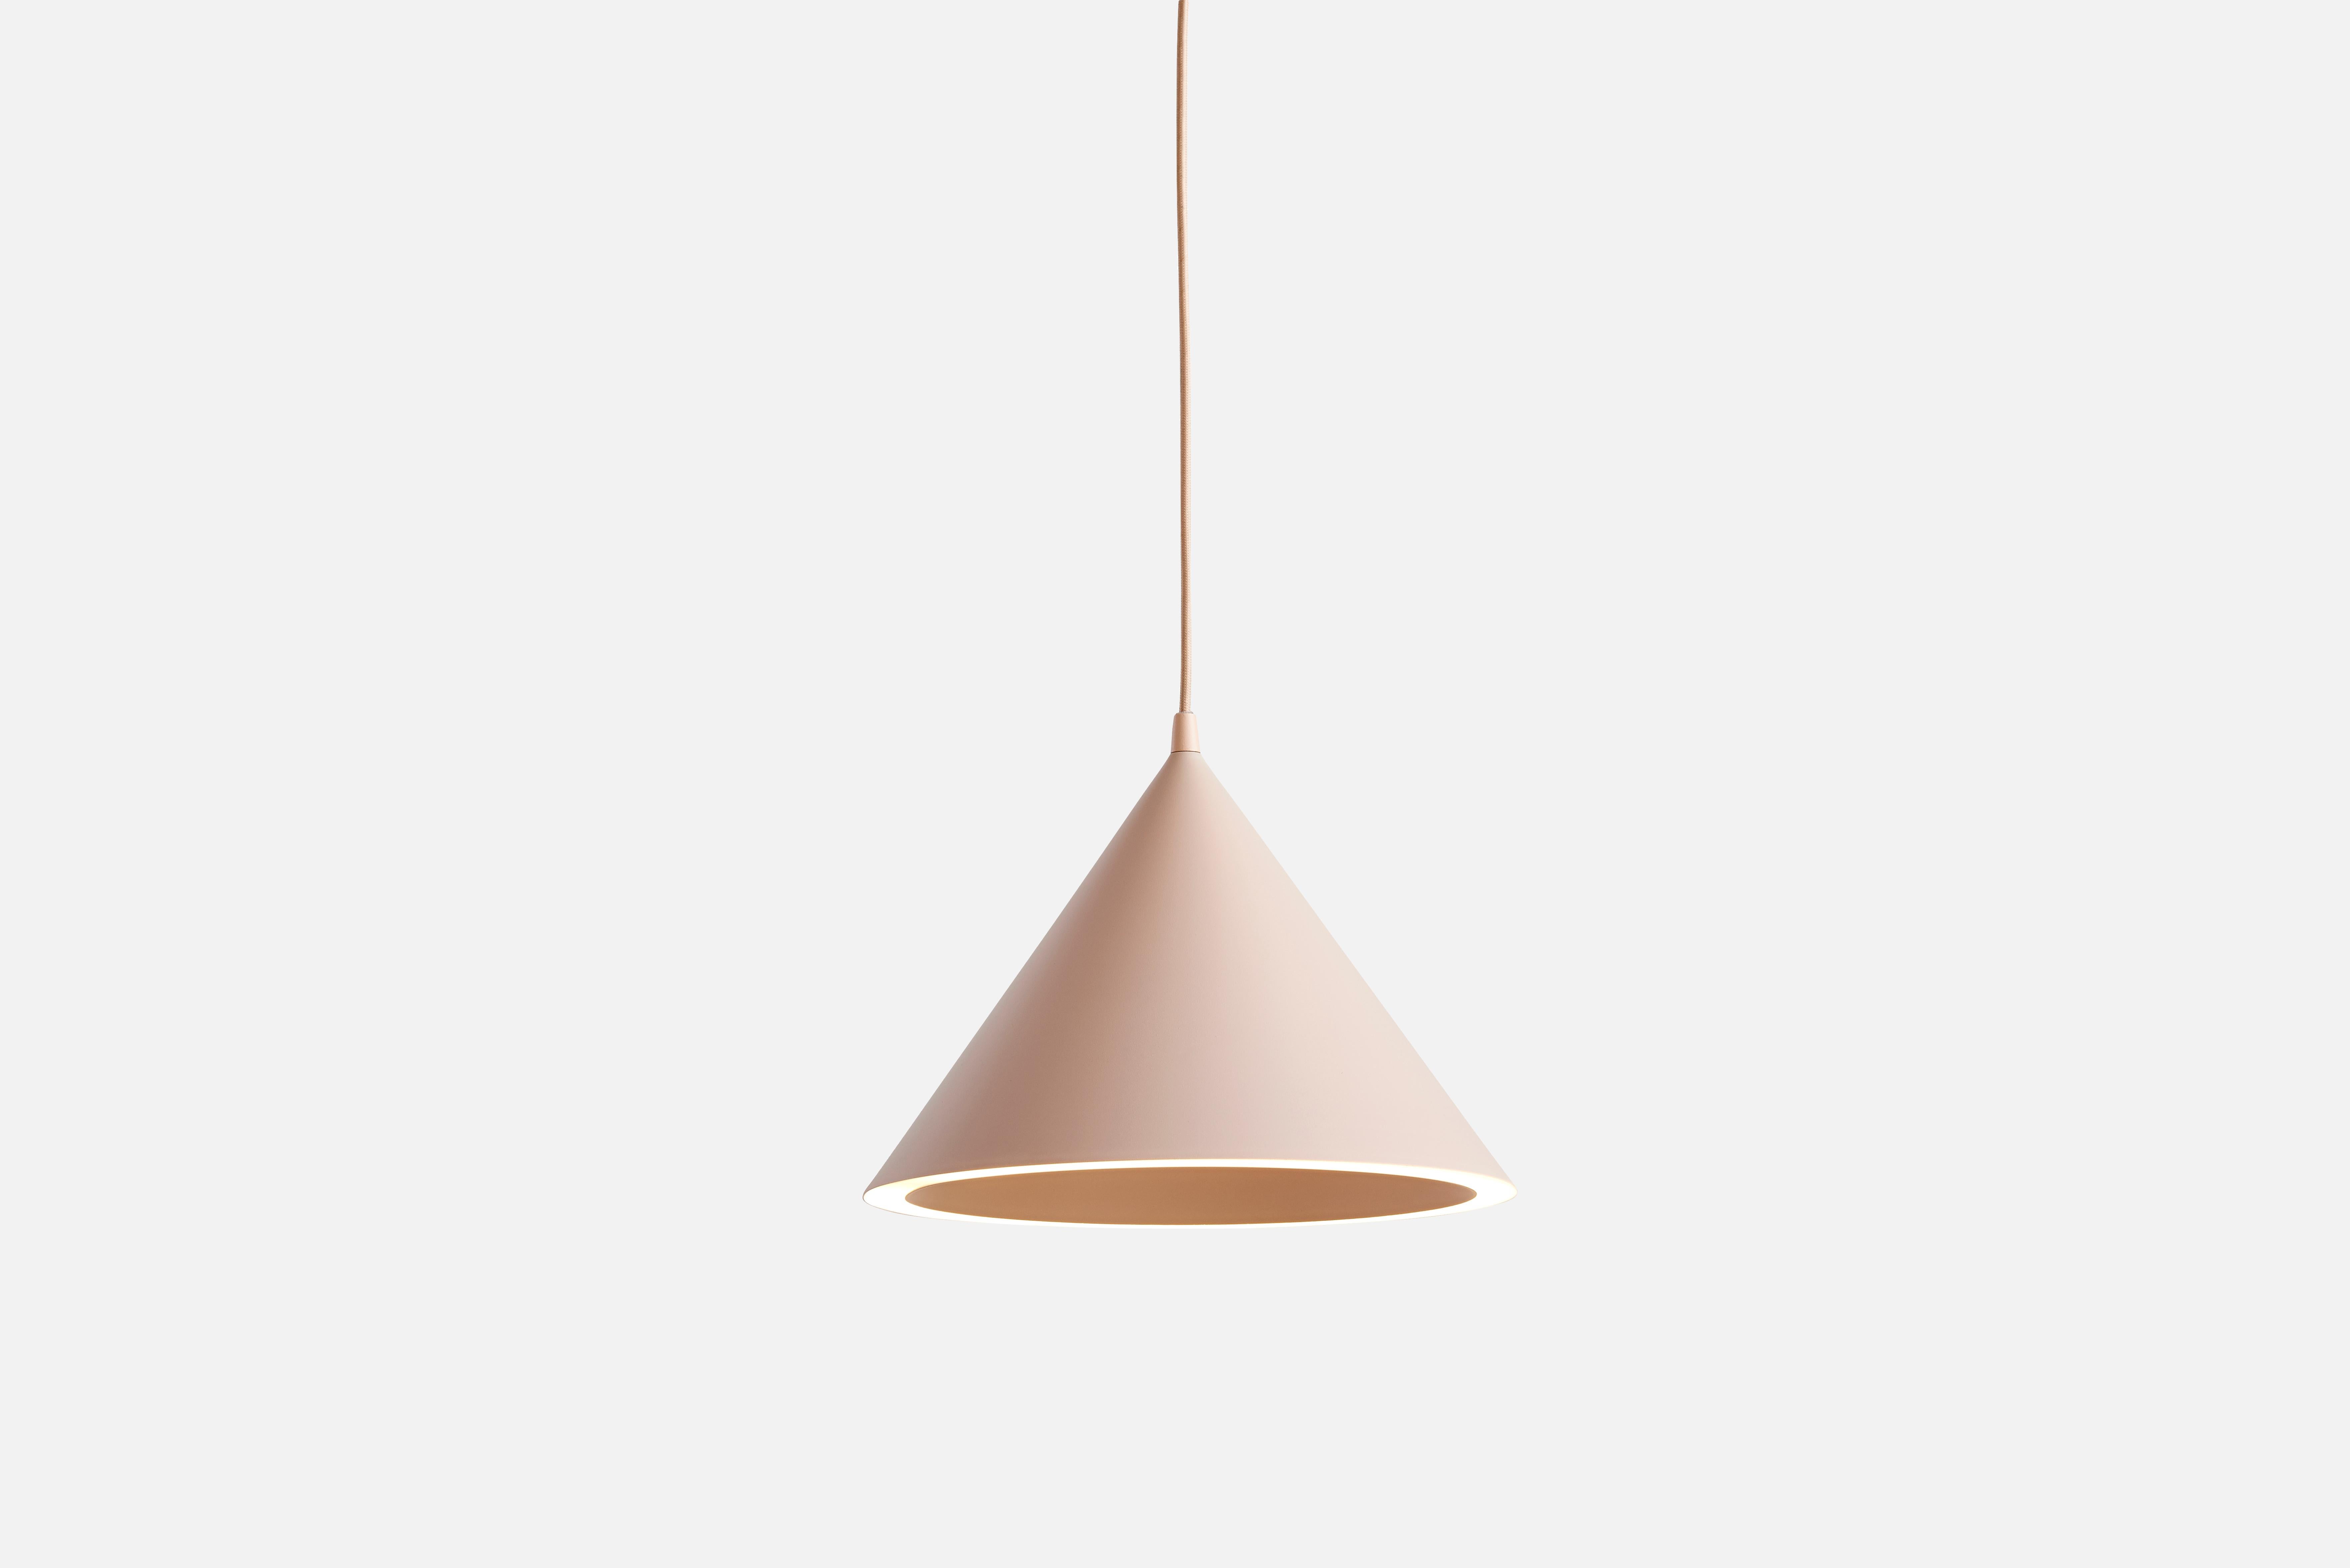 Small Nude Annular pendant lamp by MSDS Studio
Materials: Aluminum.
Dimensions: D 32 x H 23.8 cm
Available in white, nude, mint, black.

MSDS STUDIO is a successful Canadian design studio that works in interior, furniture and lighting design.